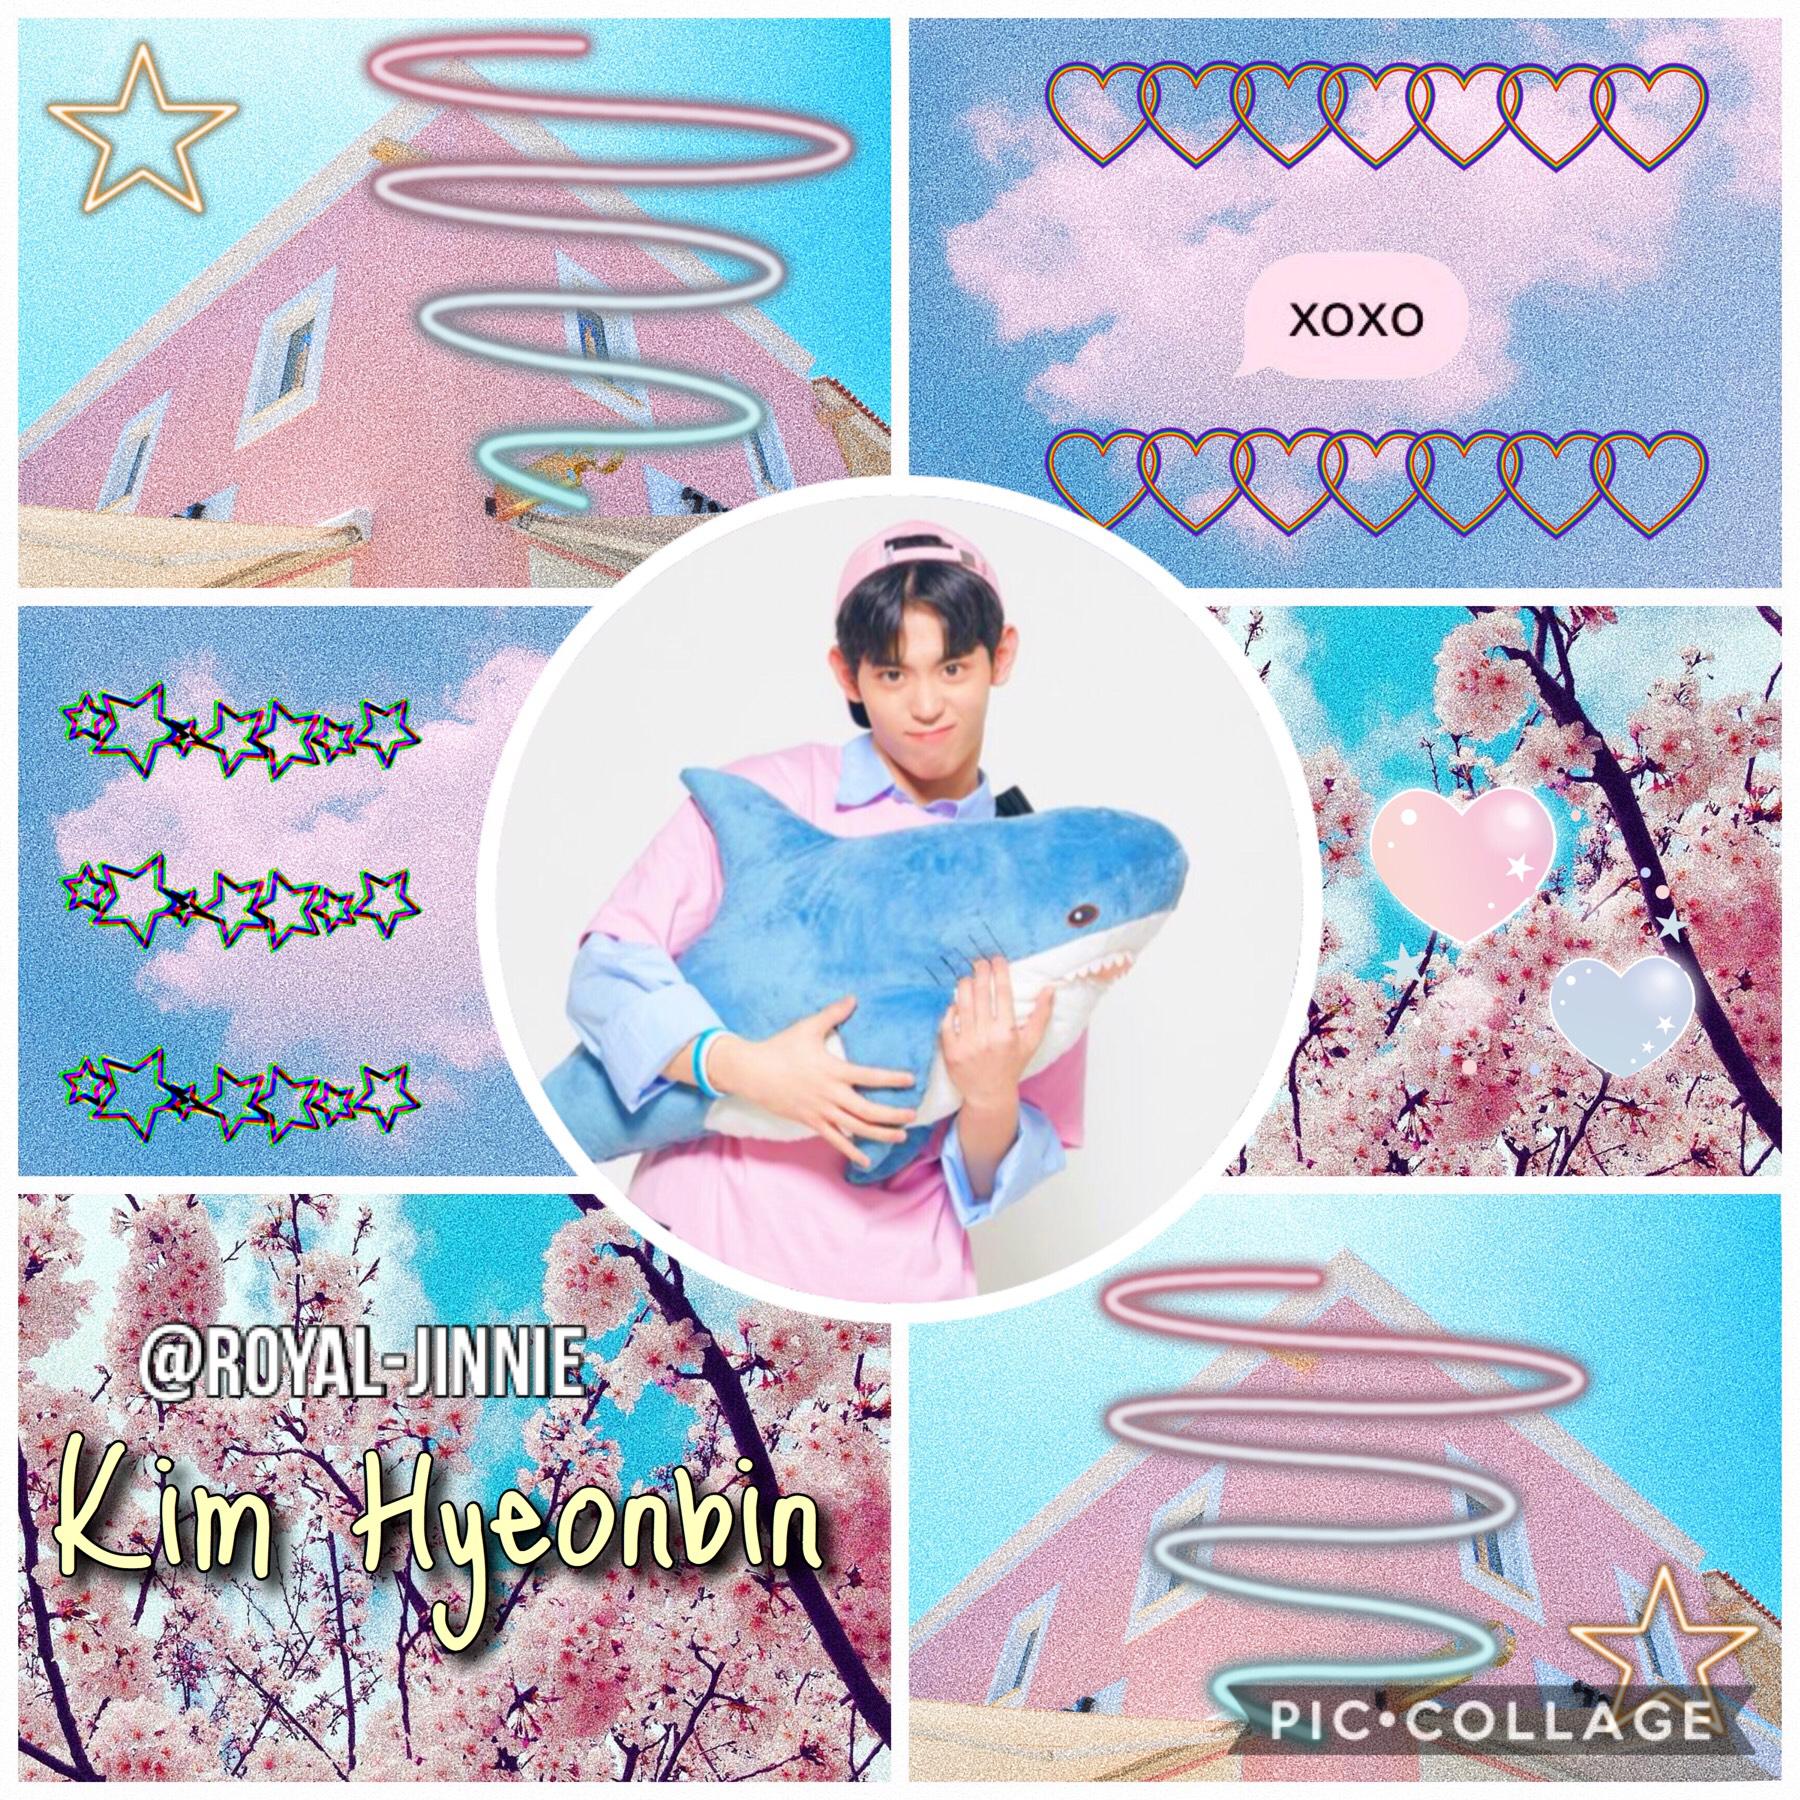 •Joo🍯•
Heyyyy~~~ so I’m going to start a new “theme” on this account with Produce X 101 edits bc I’ll be posting them on my Amino. These edits will be of my top picks!! HYEONBIN IS SO TALENTED LIKE IDEK IF HES A RAPPER OR VOCALIST DJEJDWJAJA